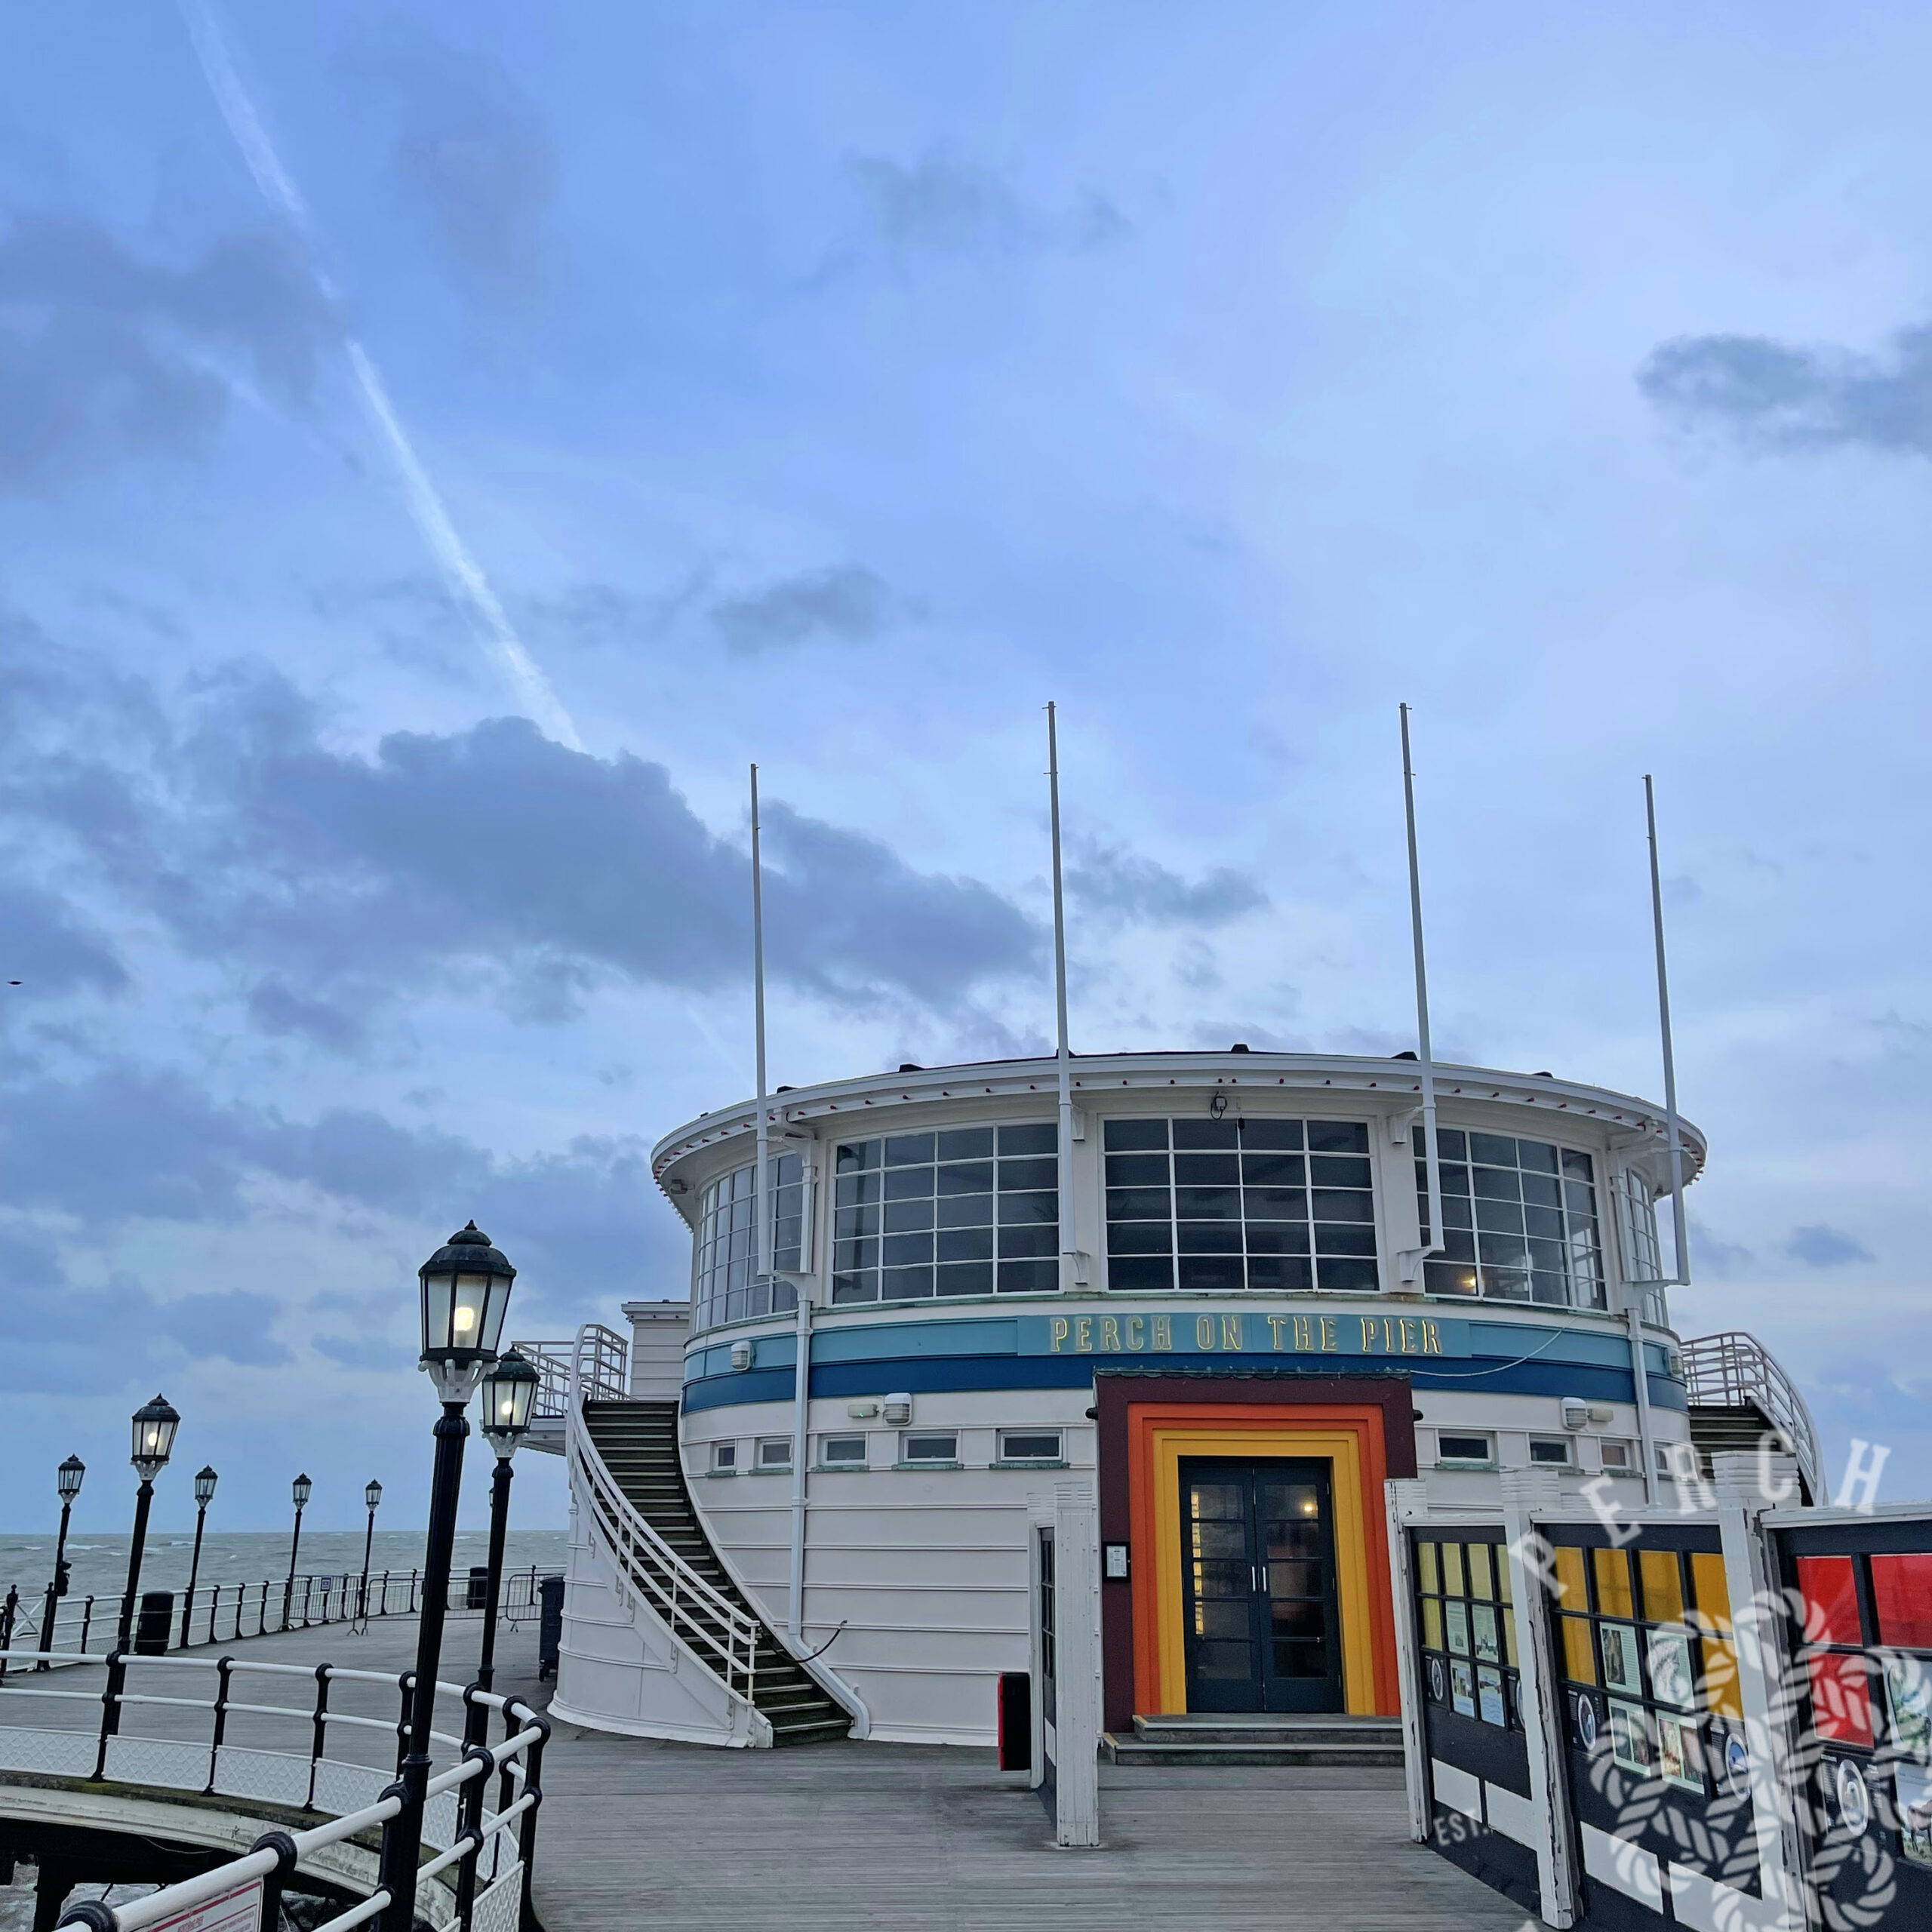 Perch on Worthing Pier building